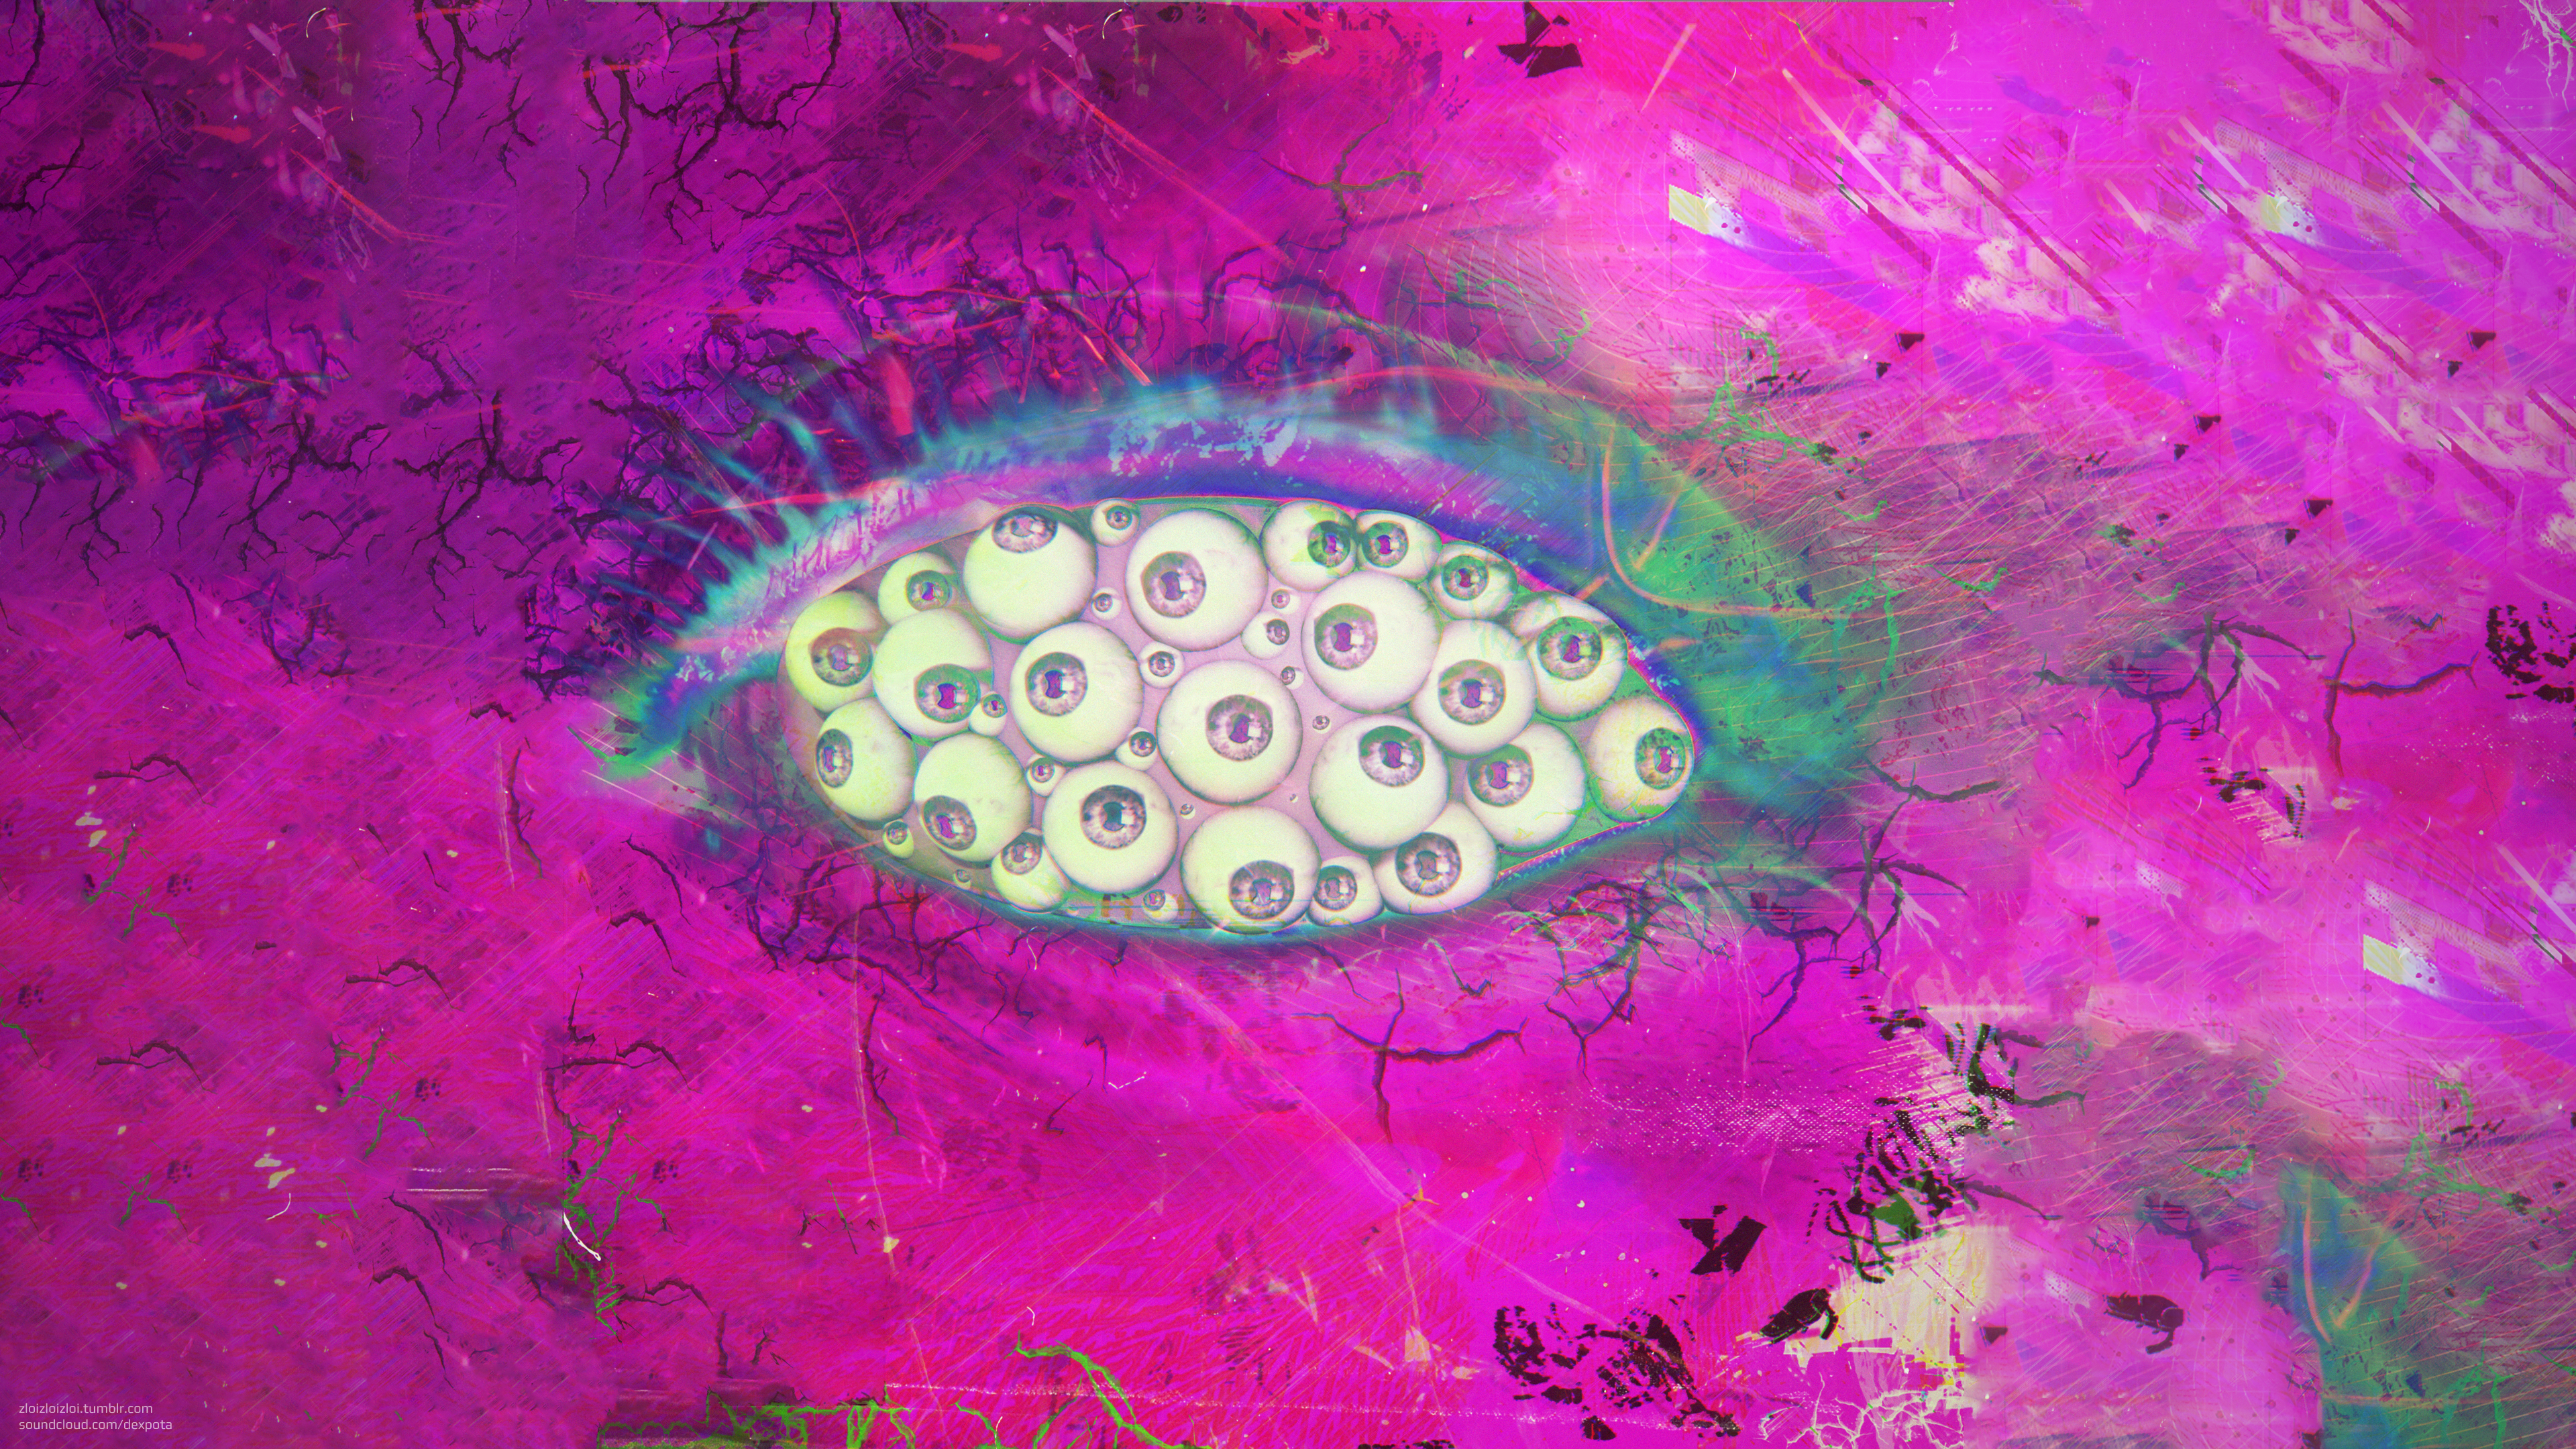 Glitch Art Abstract Eyes Purple Background Cover Art Album Covers 3D Abstract Dubstep Trippy Psyched 3840x2160